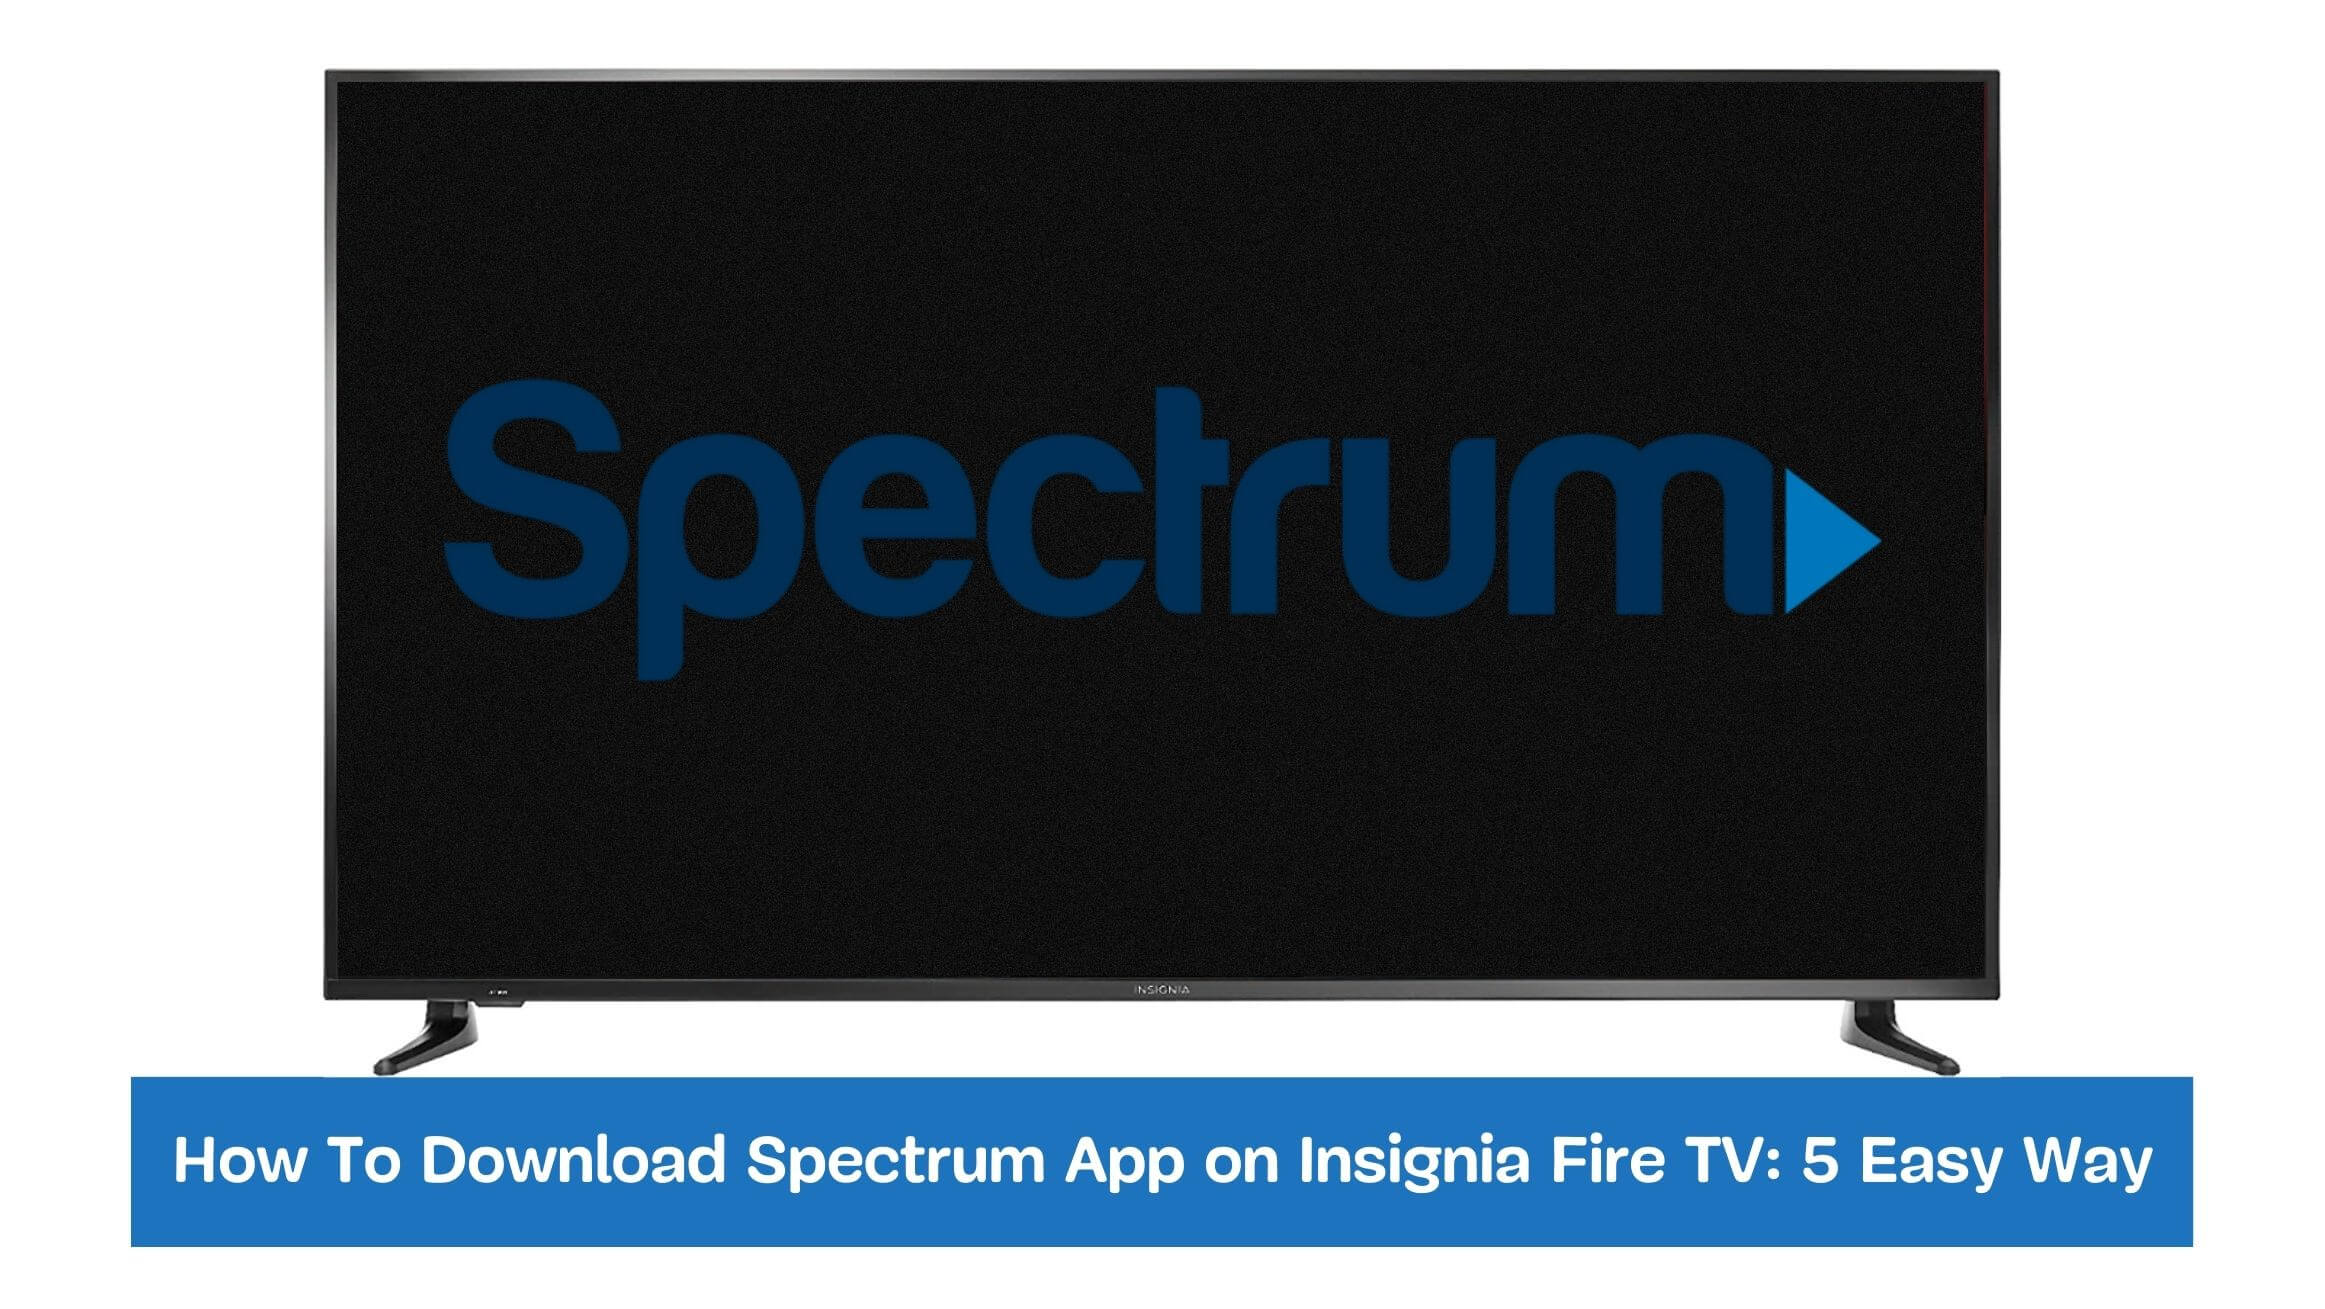 How To Download Spectrum App on Insignia Fire TV: 5 Easy Way